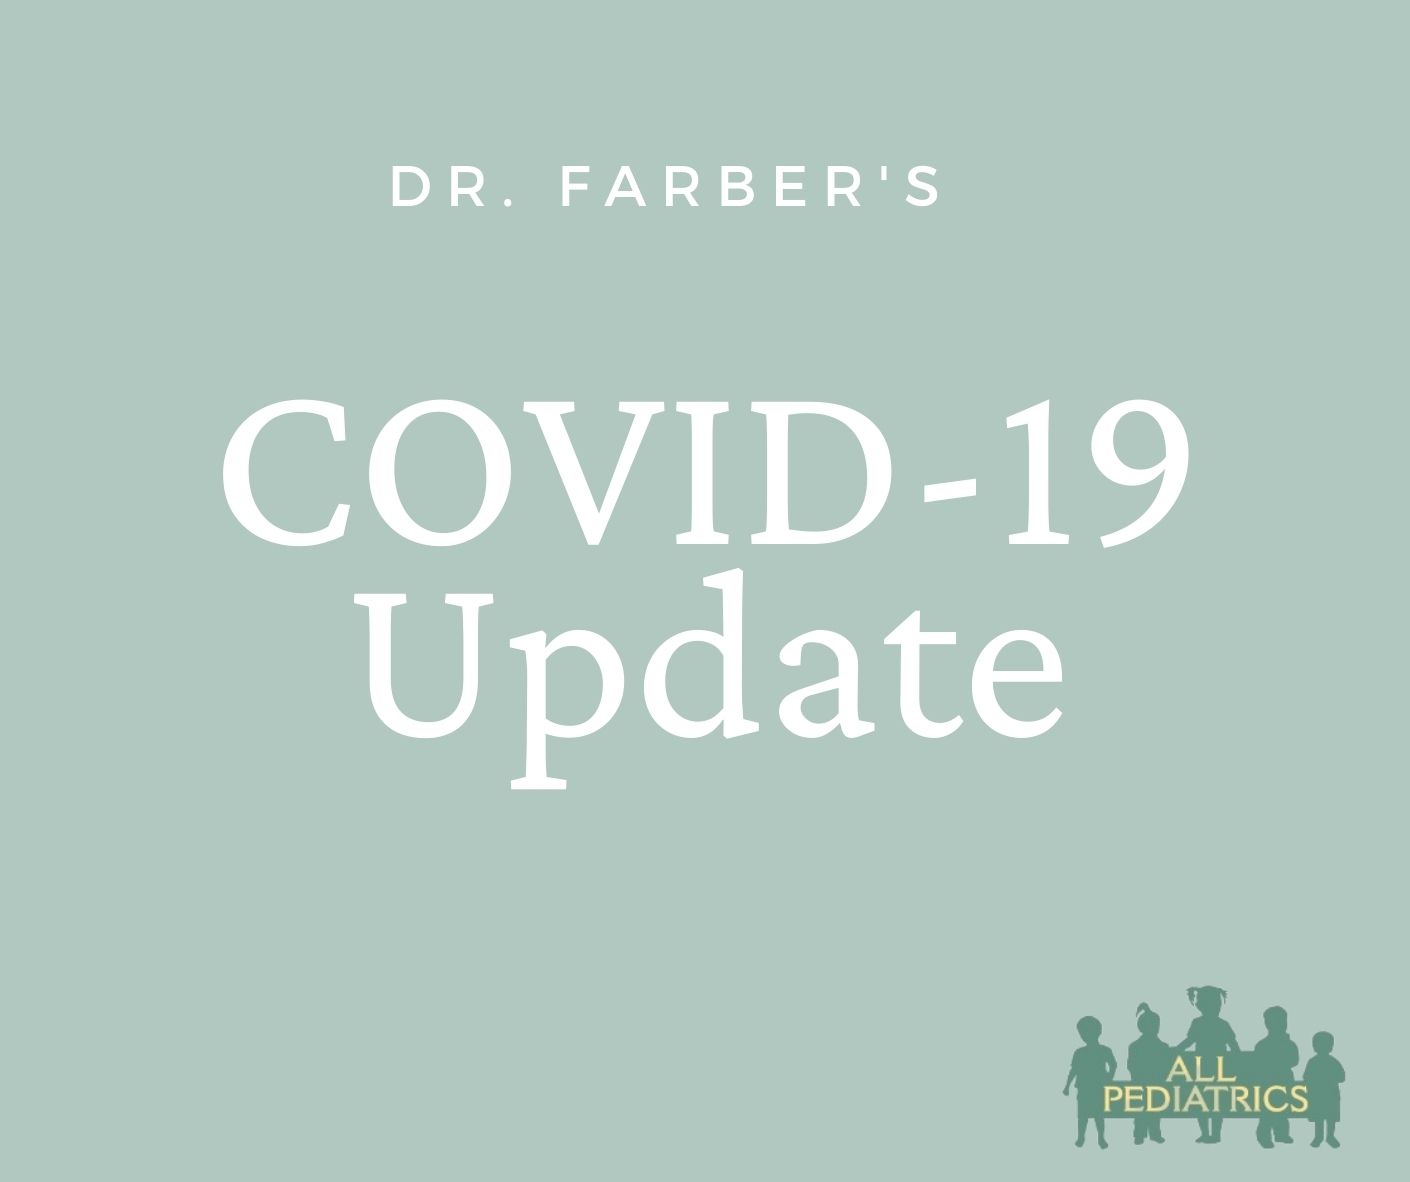 Dr. Farber's COVID-19 Update